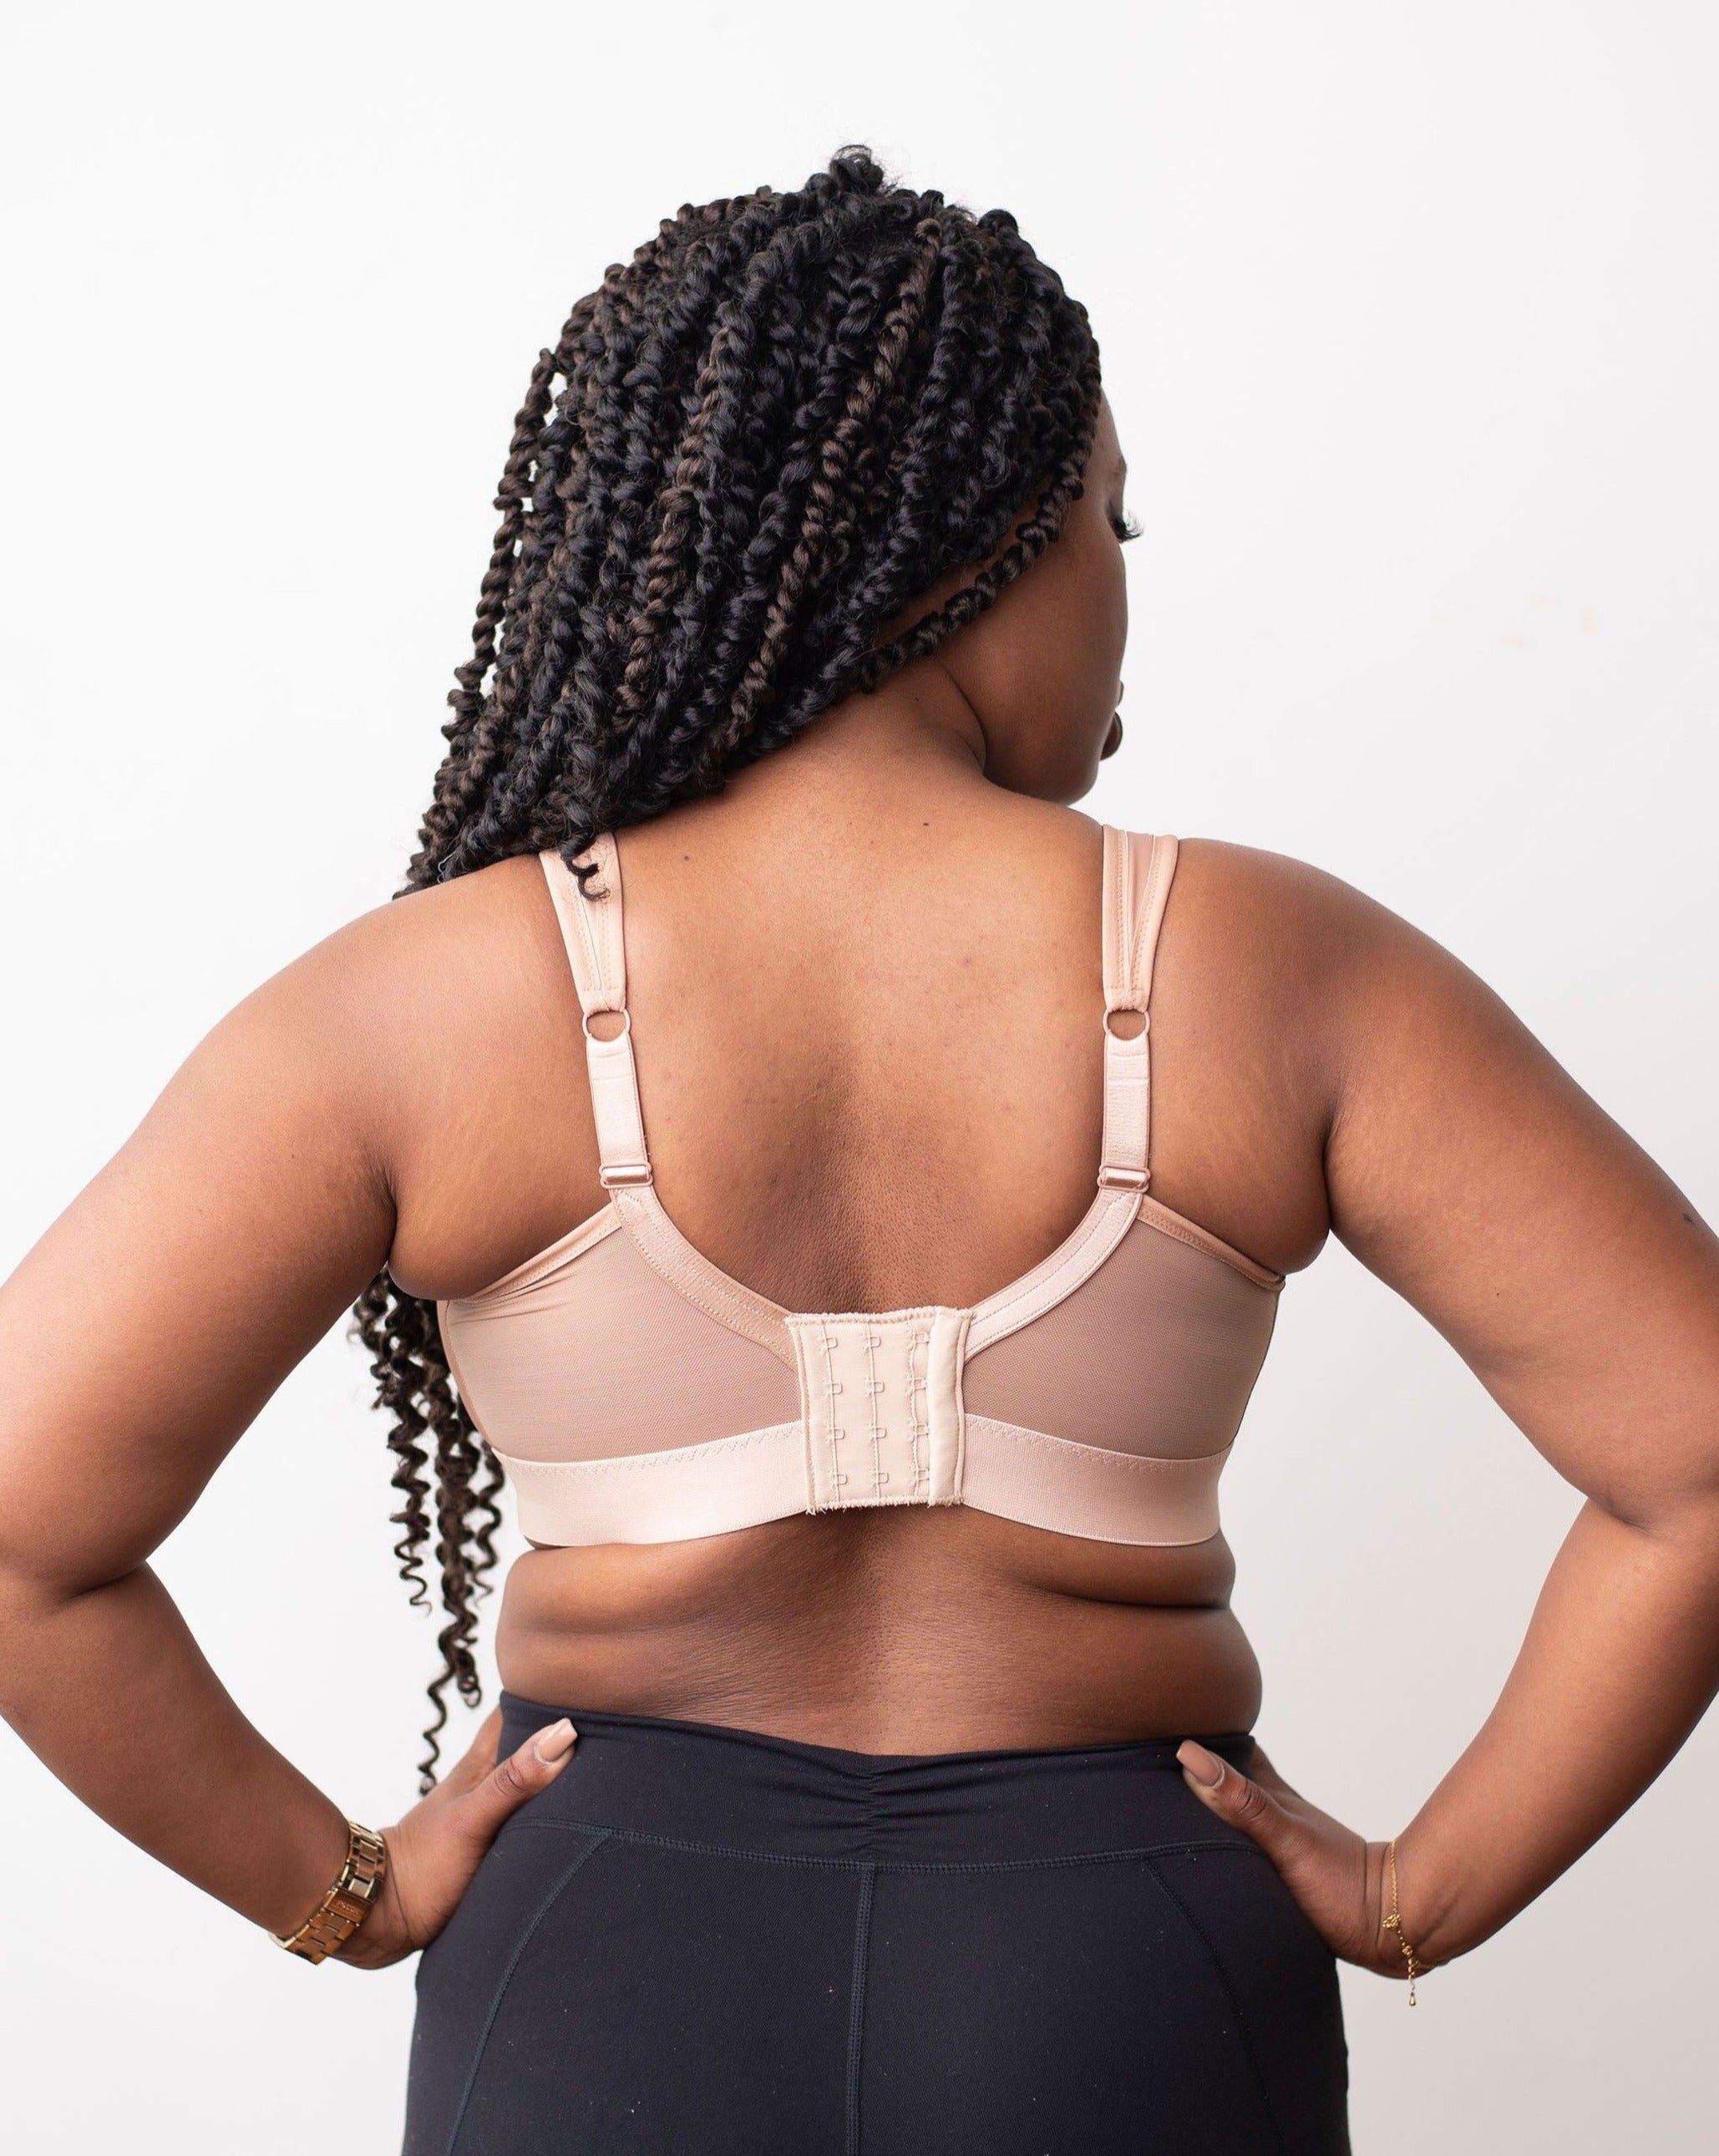 Lia from Rubies Bras, a female with long braided hair, is wearing a beige maximum solids full coverage bra. Back shot on white backdrop.